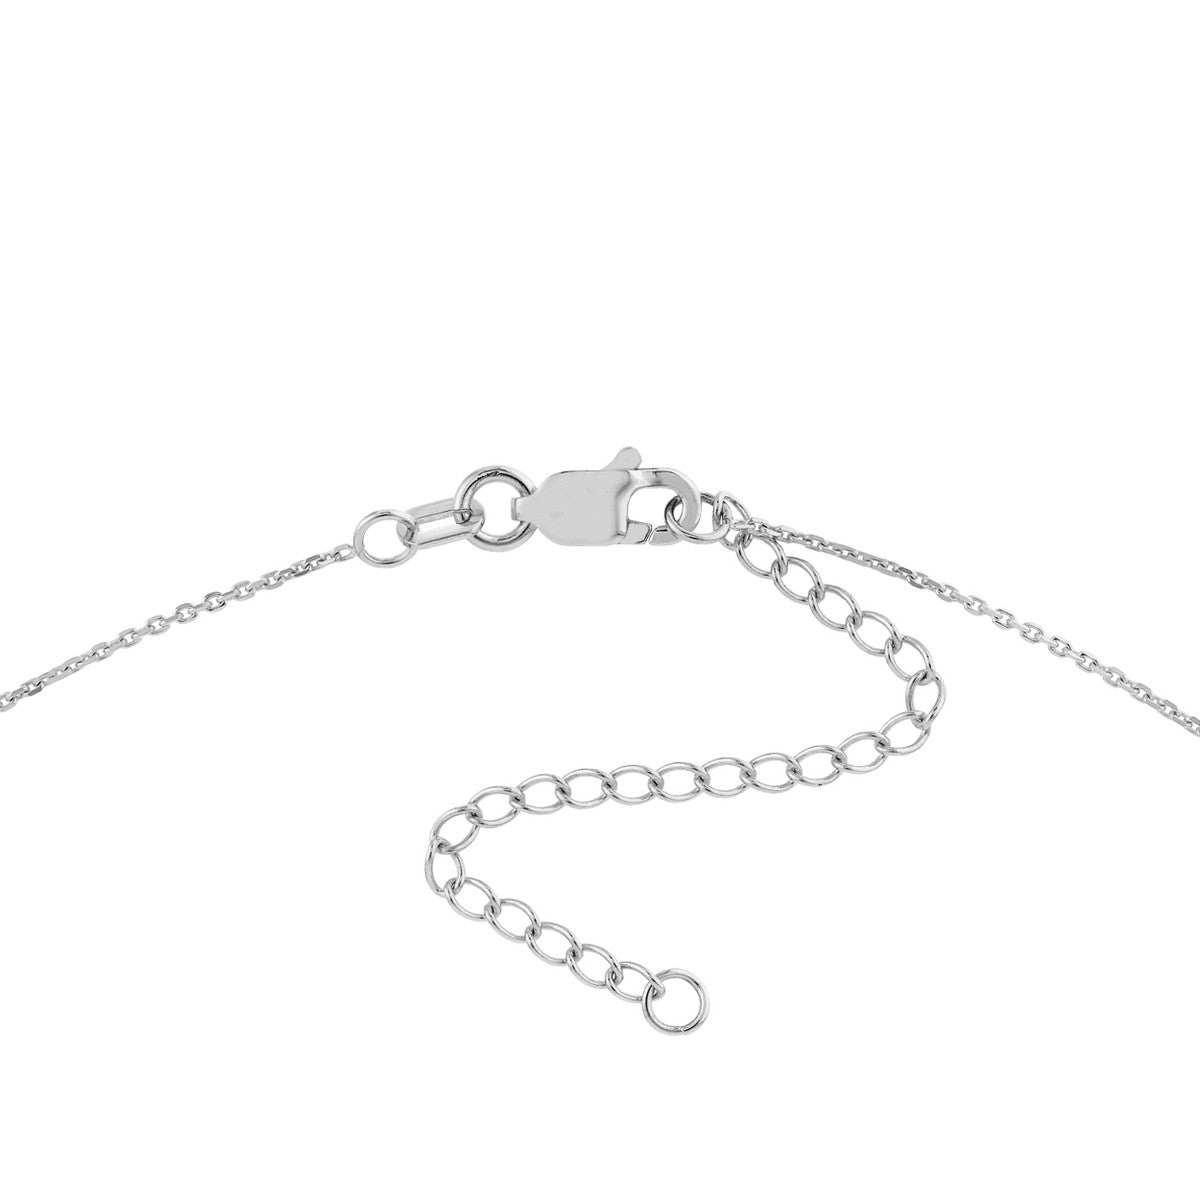 Plated Sterling Silver Bar Necklace with Heart